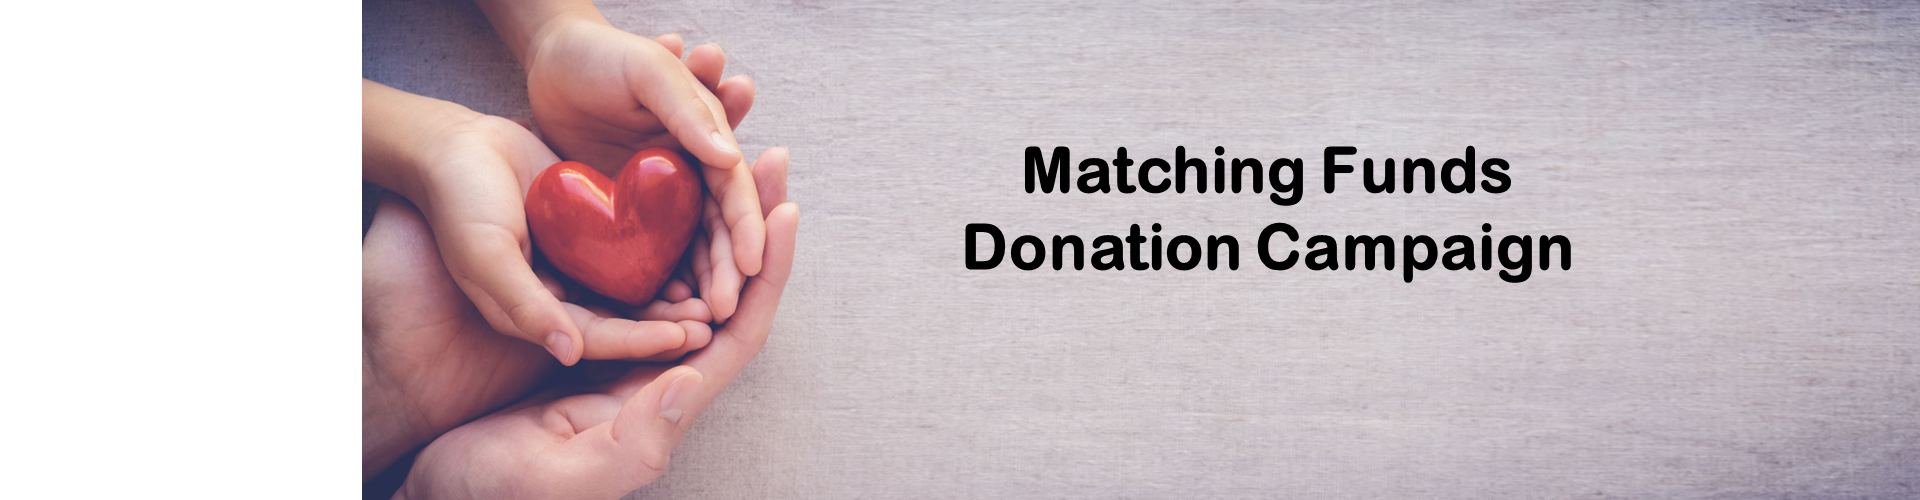 Matching Funds Donation Campaign image